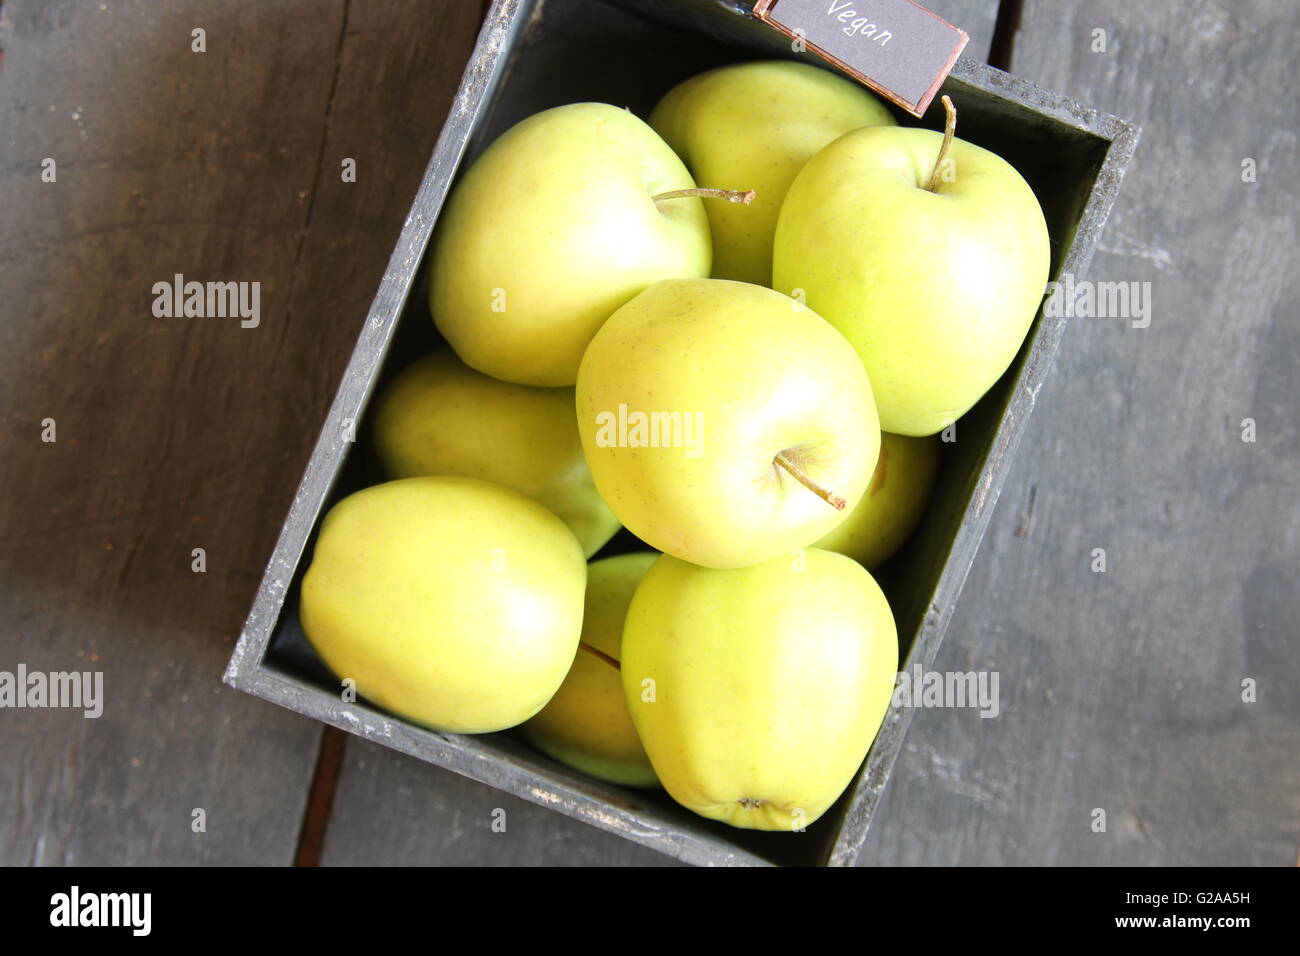 vegan food idea, green apples on a table and text Stock Photo